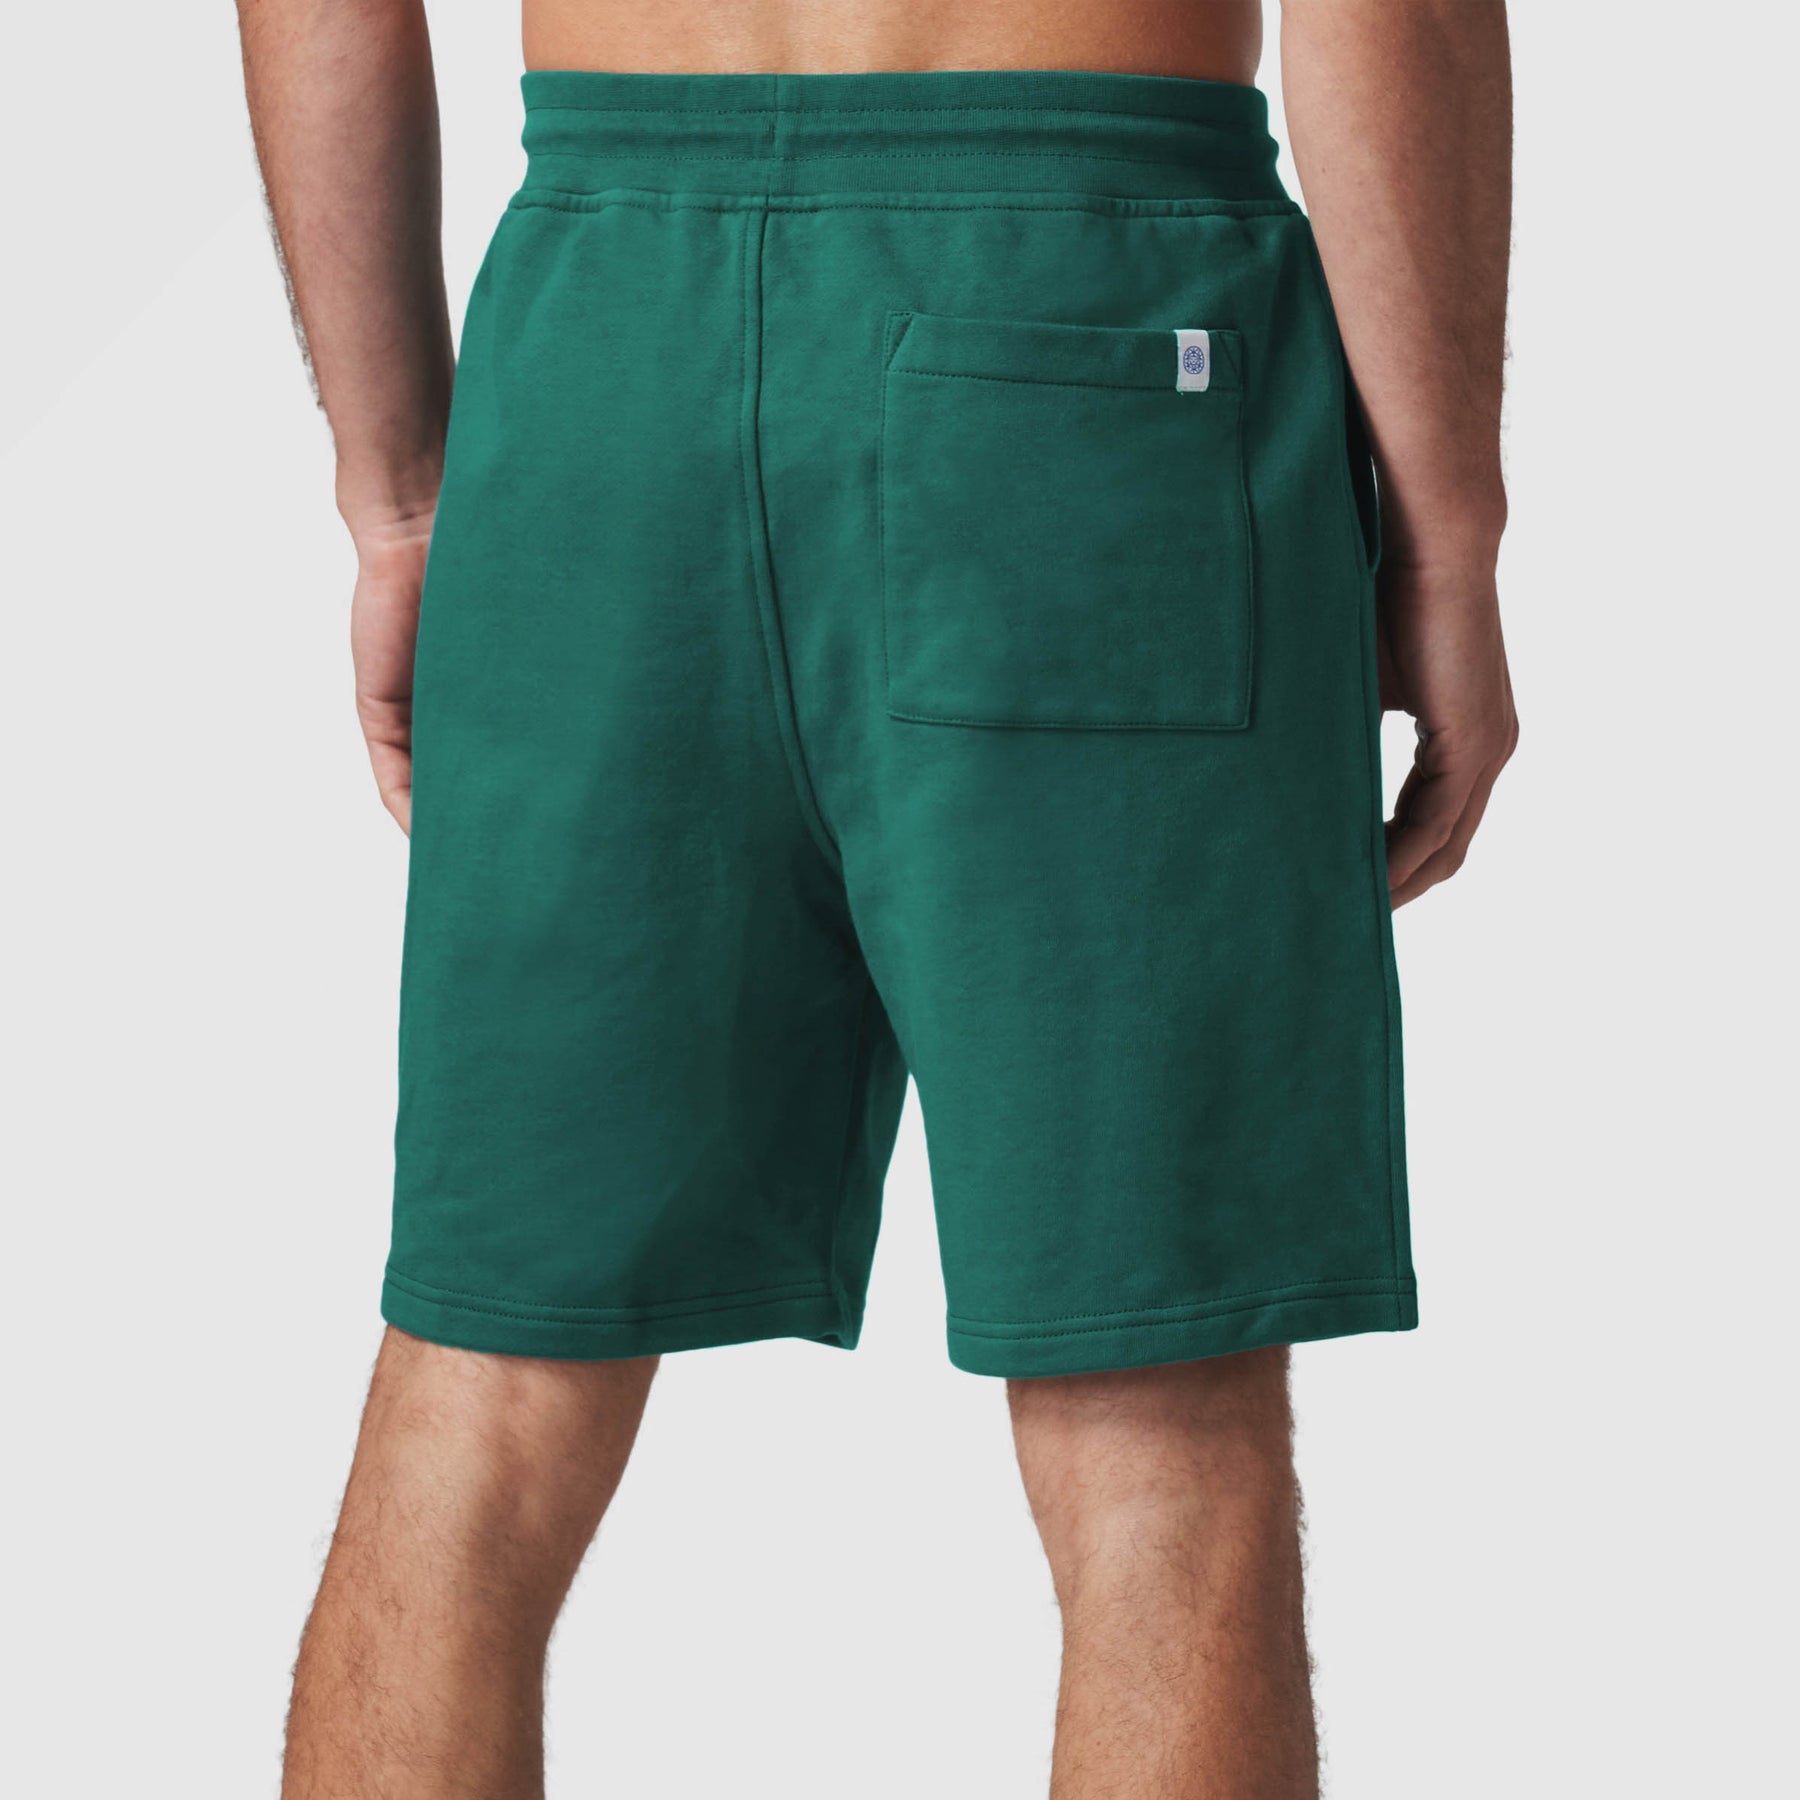 Men's Get Your Cold On Green Shorts